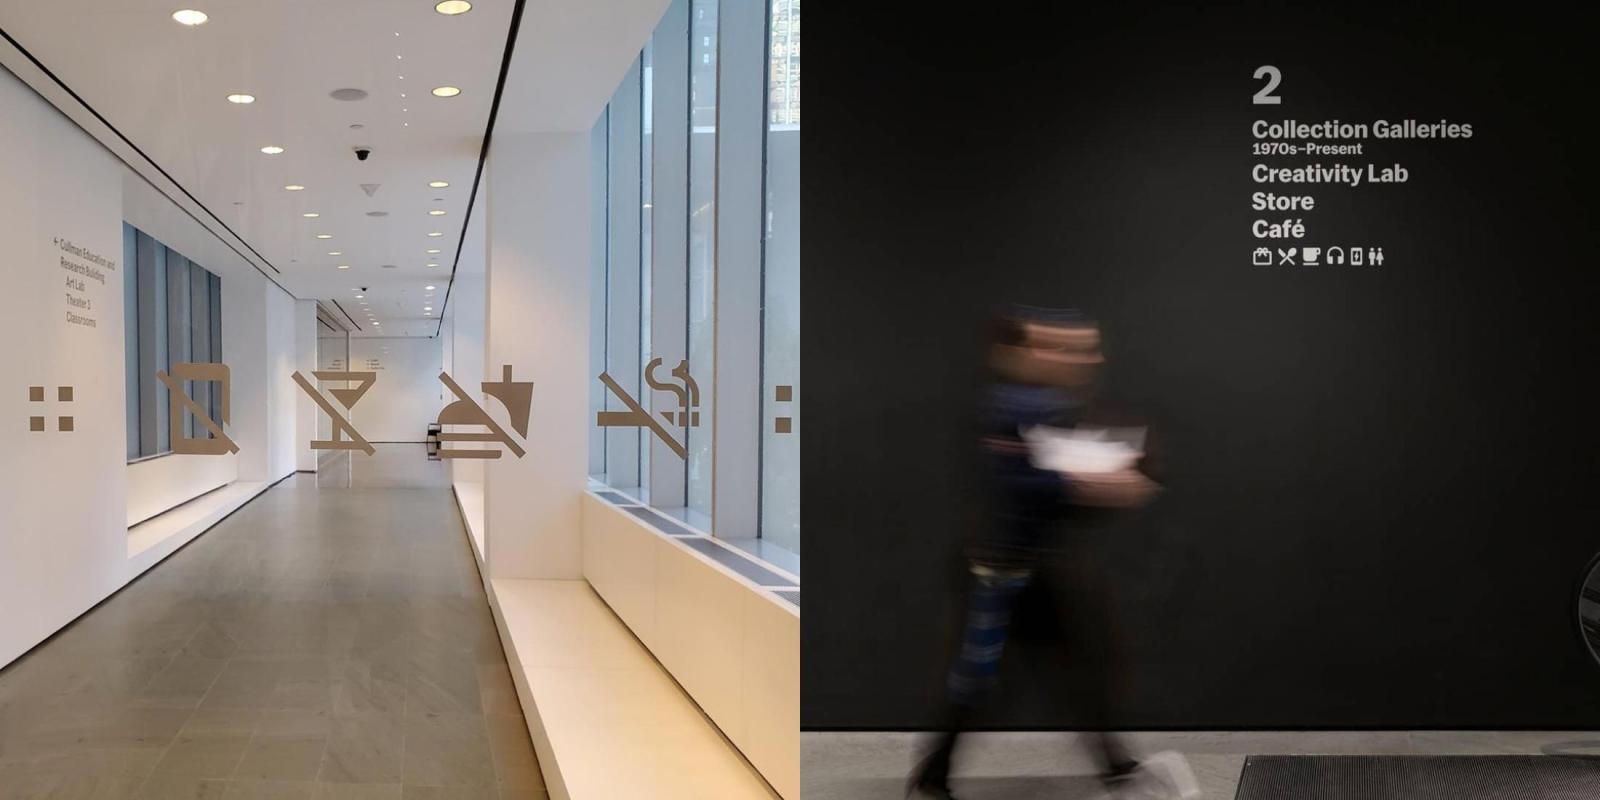 NYC MoMA using Material Design icons in the real world to guide visitors - Geek